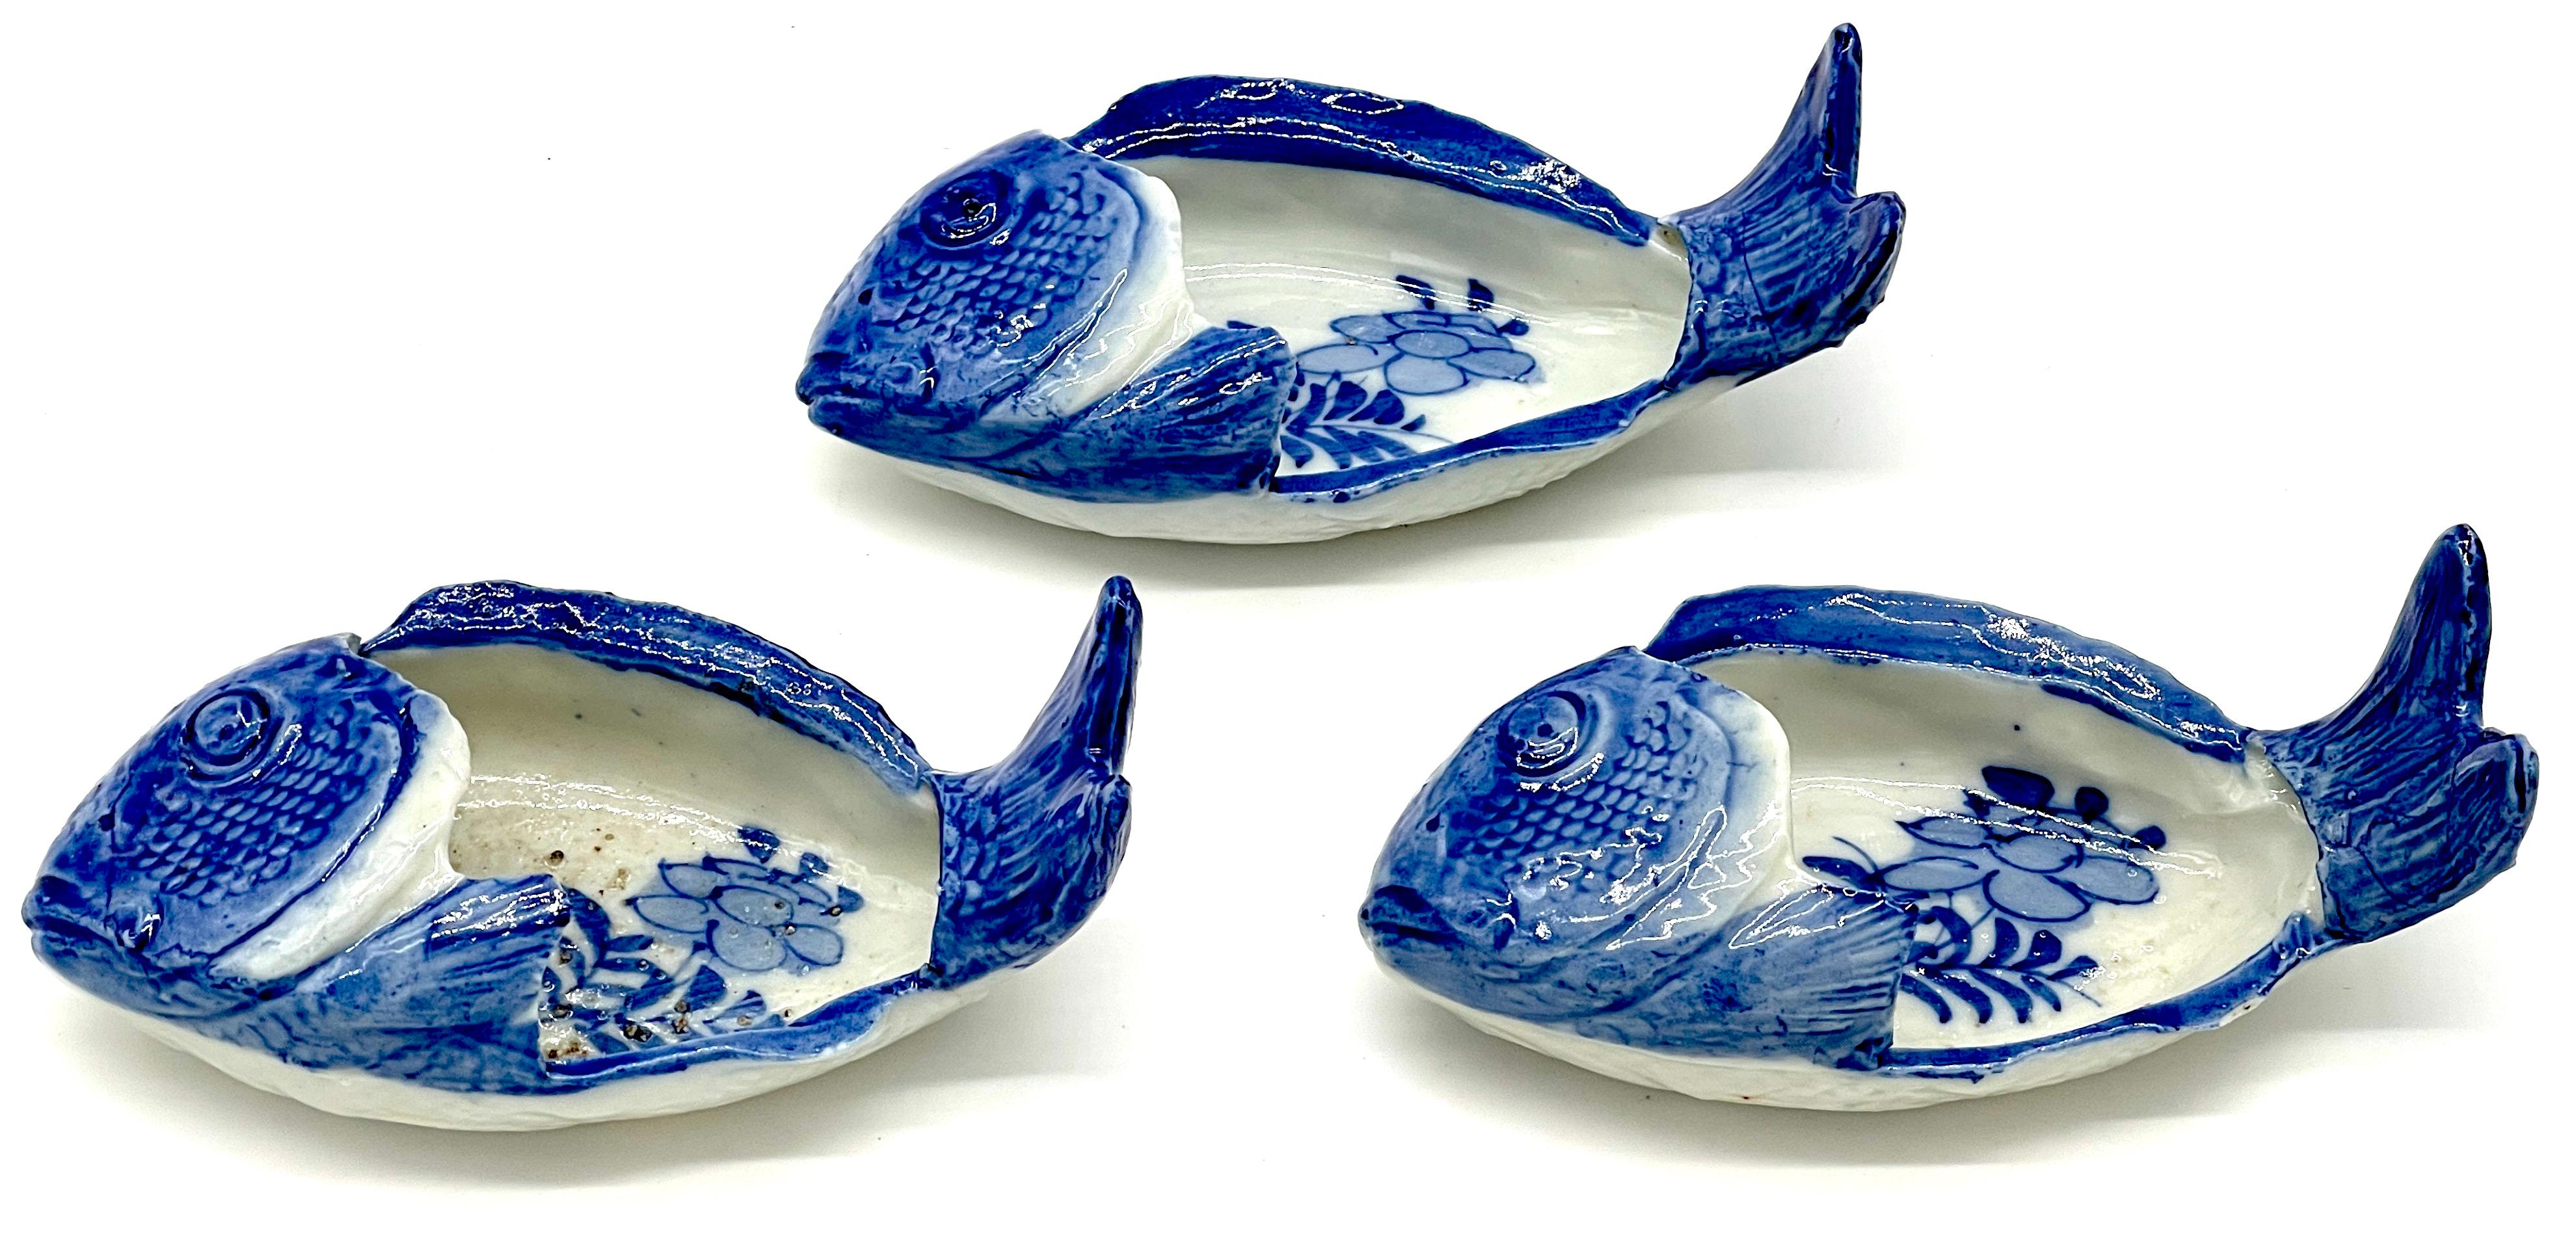 Set of Three Meiji Period Blue & White Imari Fish Form Brush Washers
Japan, circa 1890s

Embrace the elegance of Japanese artistry with this captivating set of three Meiji period blue & white Imari fish form brush washers. Crafted during the